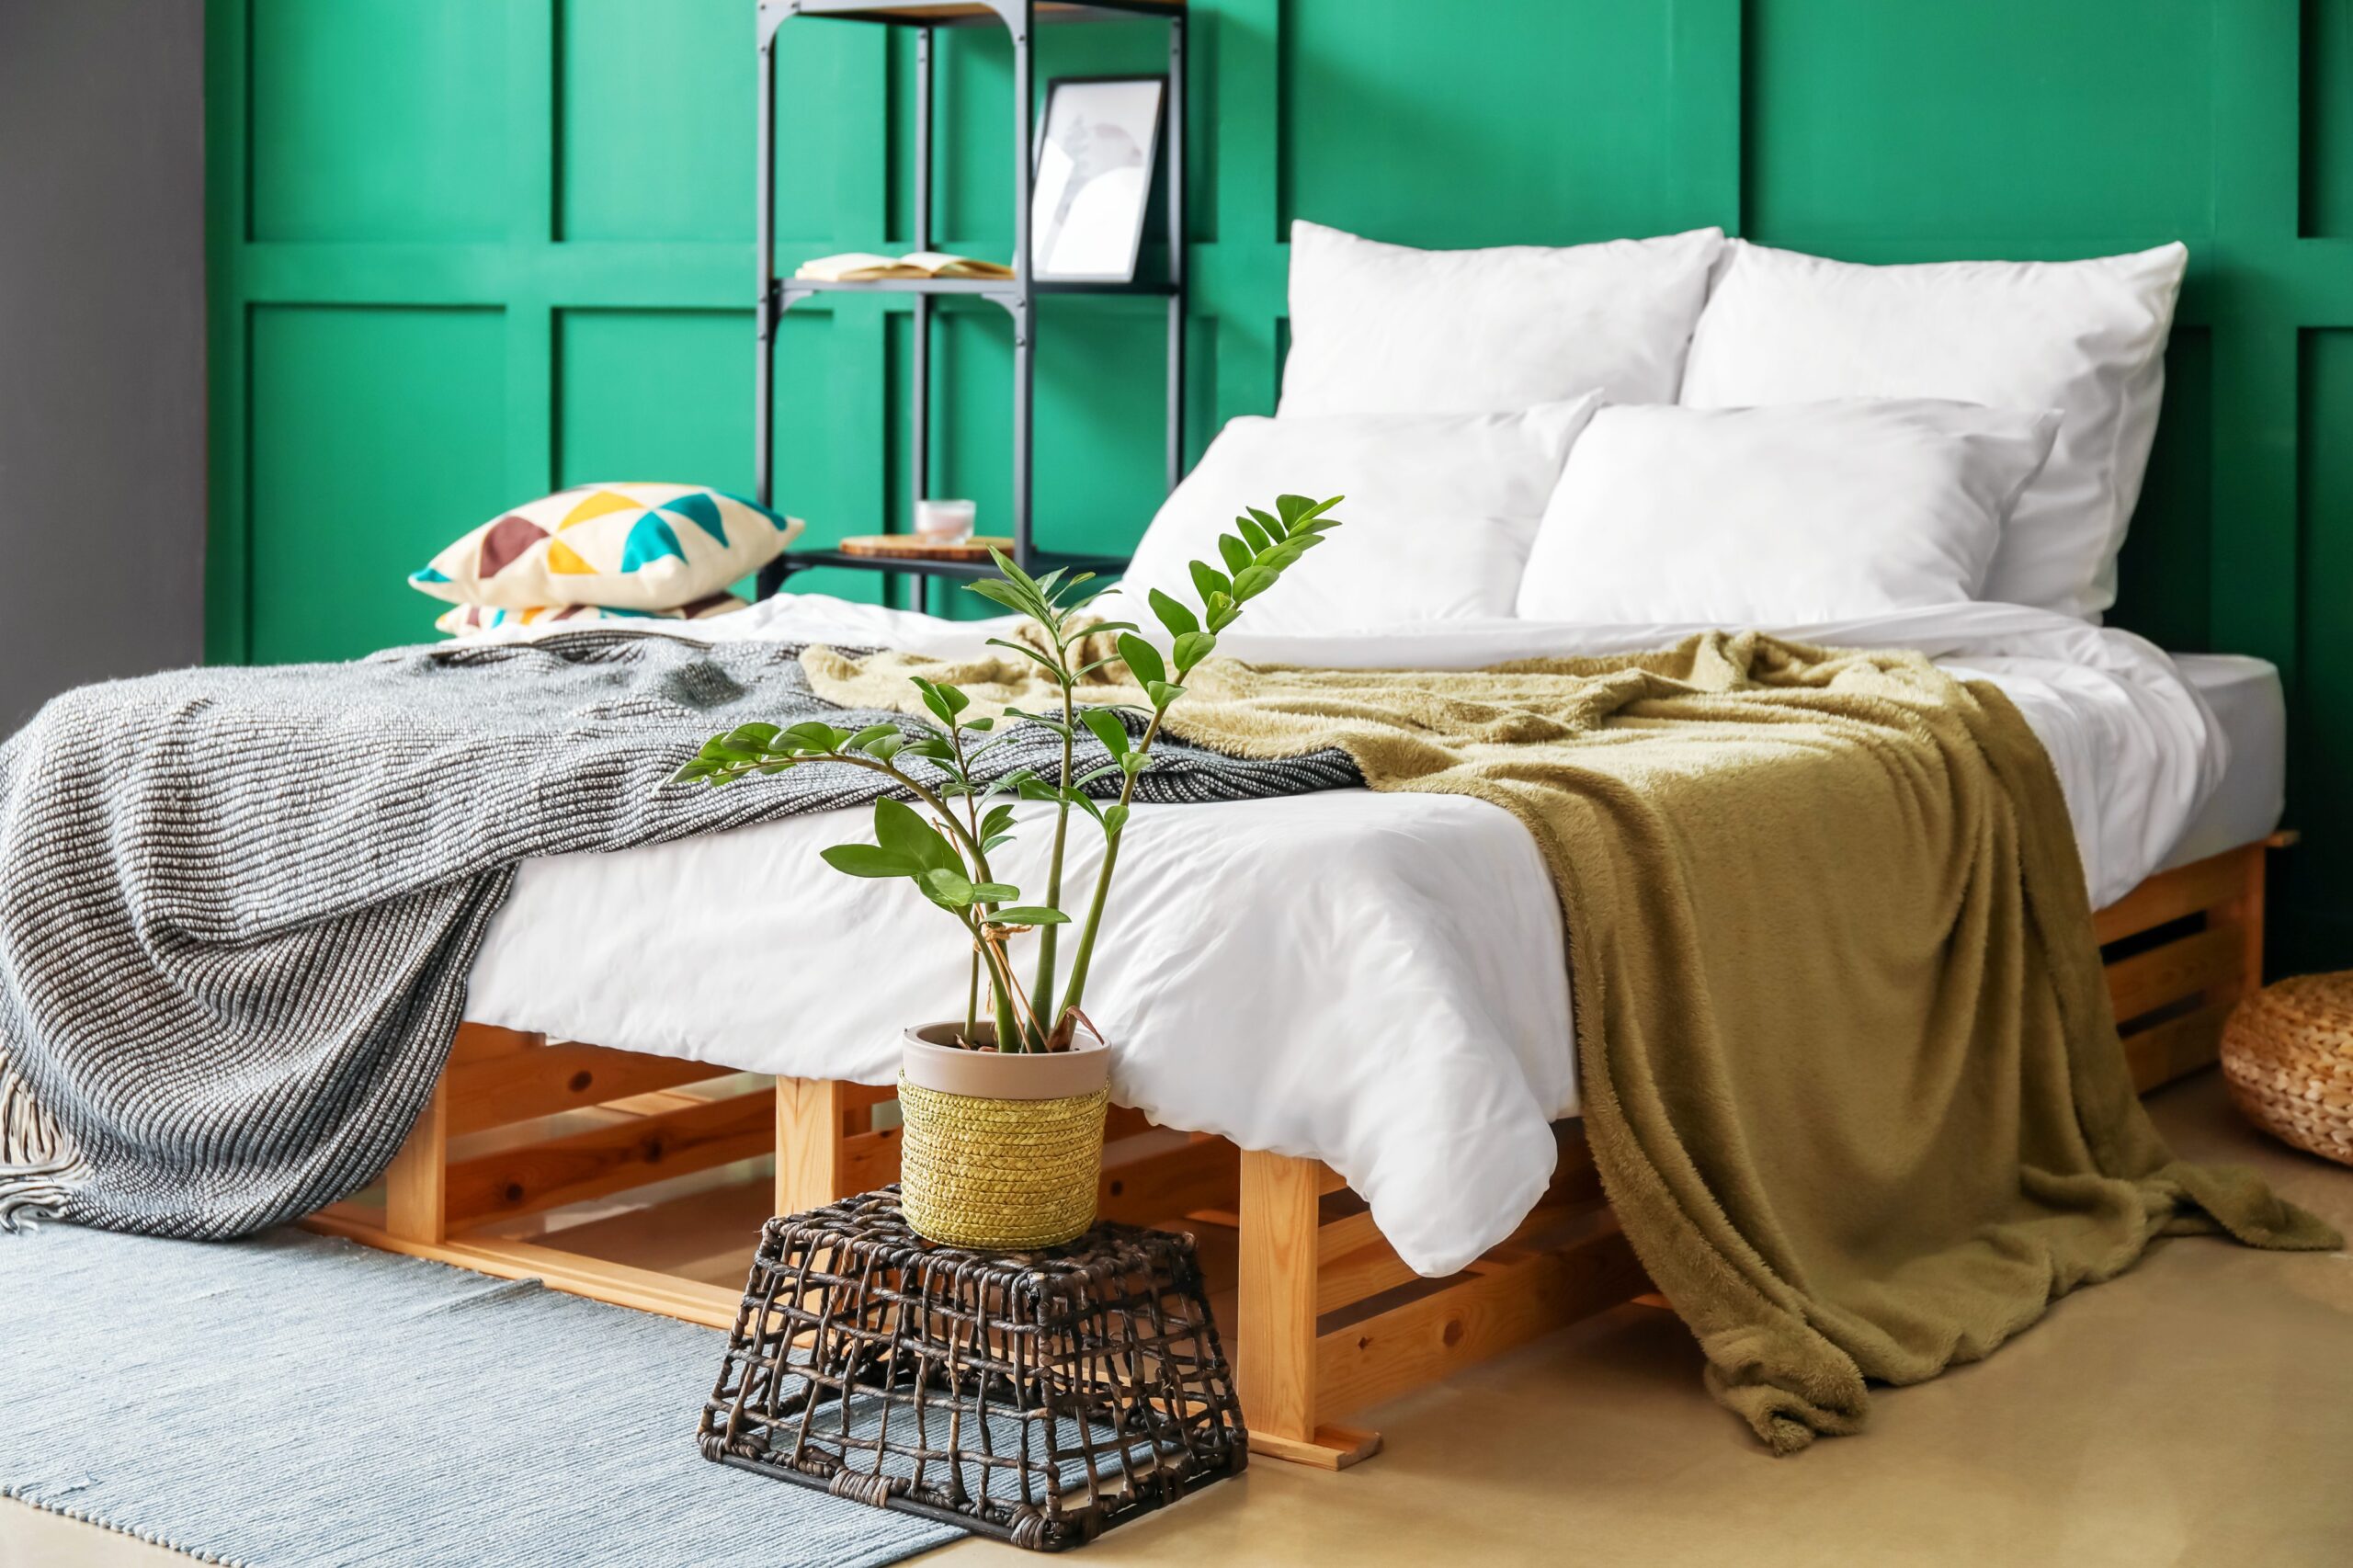 <img src="style.jpg" alt="style your bed throws green interiors"/>